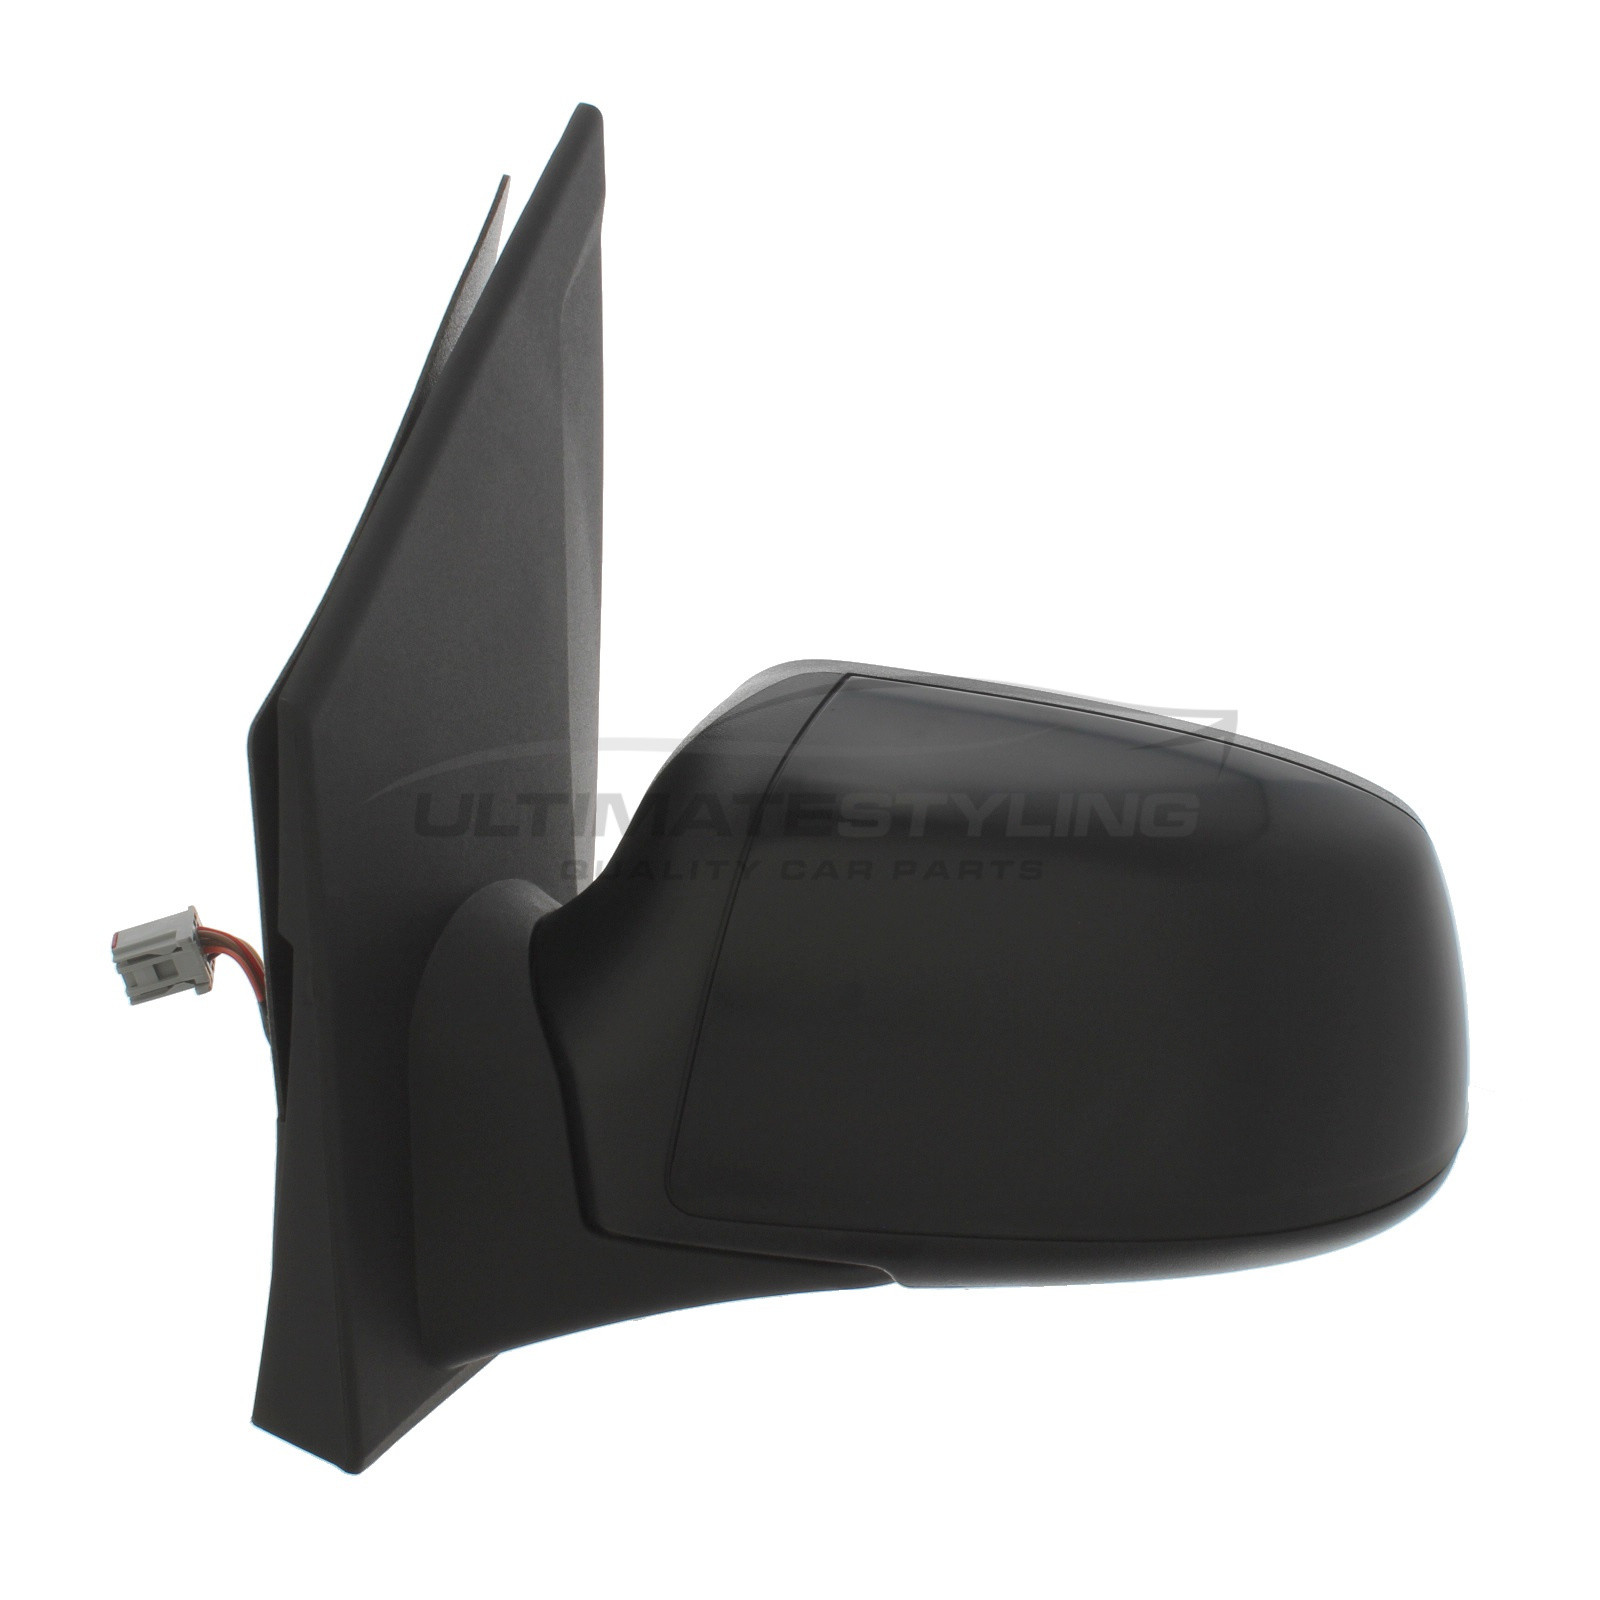 Ford Fiesta Wing Mirror / Door Mirror - Passenger Side (LH) - Electric adjustment - Heated Glass - Power Folding - Paintable - Black